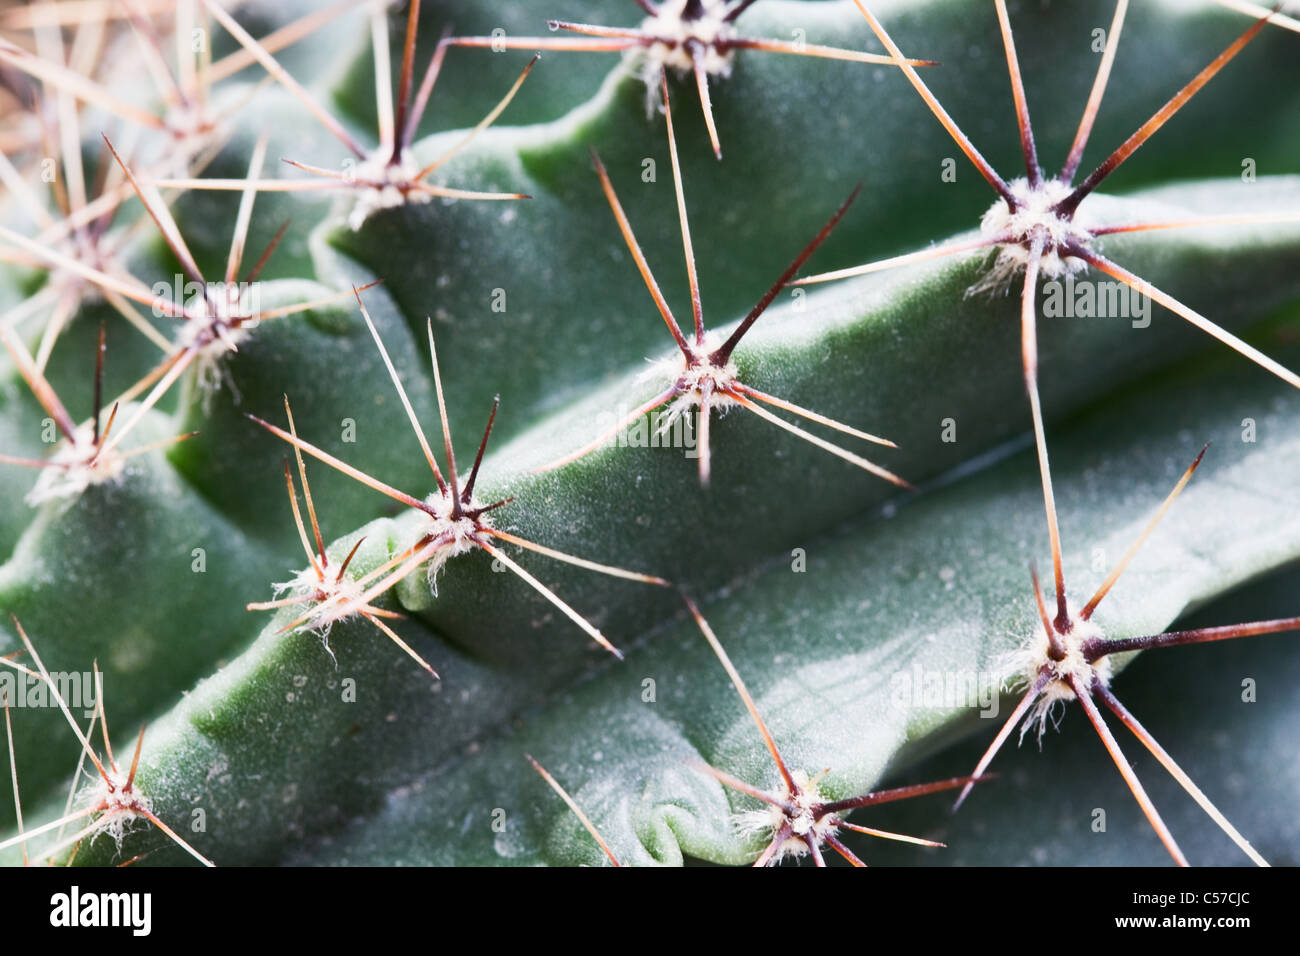 Thorn of the Harrisia Fragrans Small cactus, extreme close-up Stock Photo